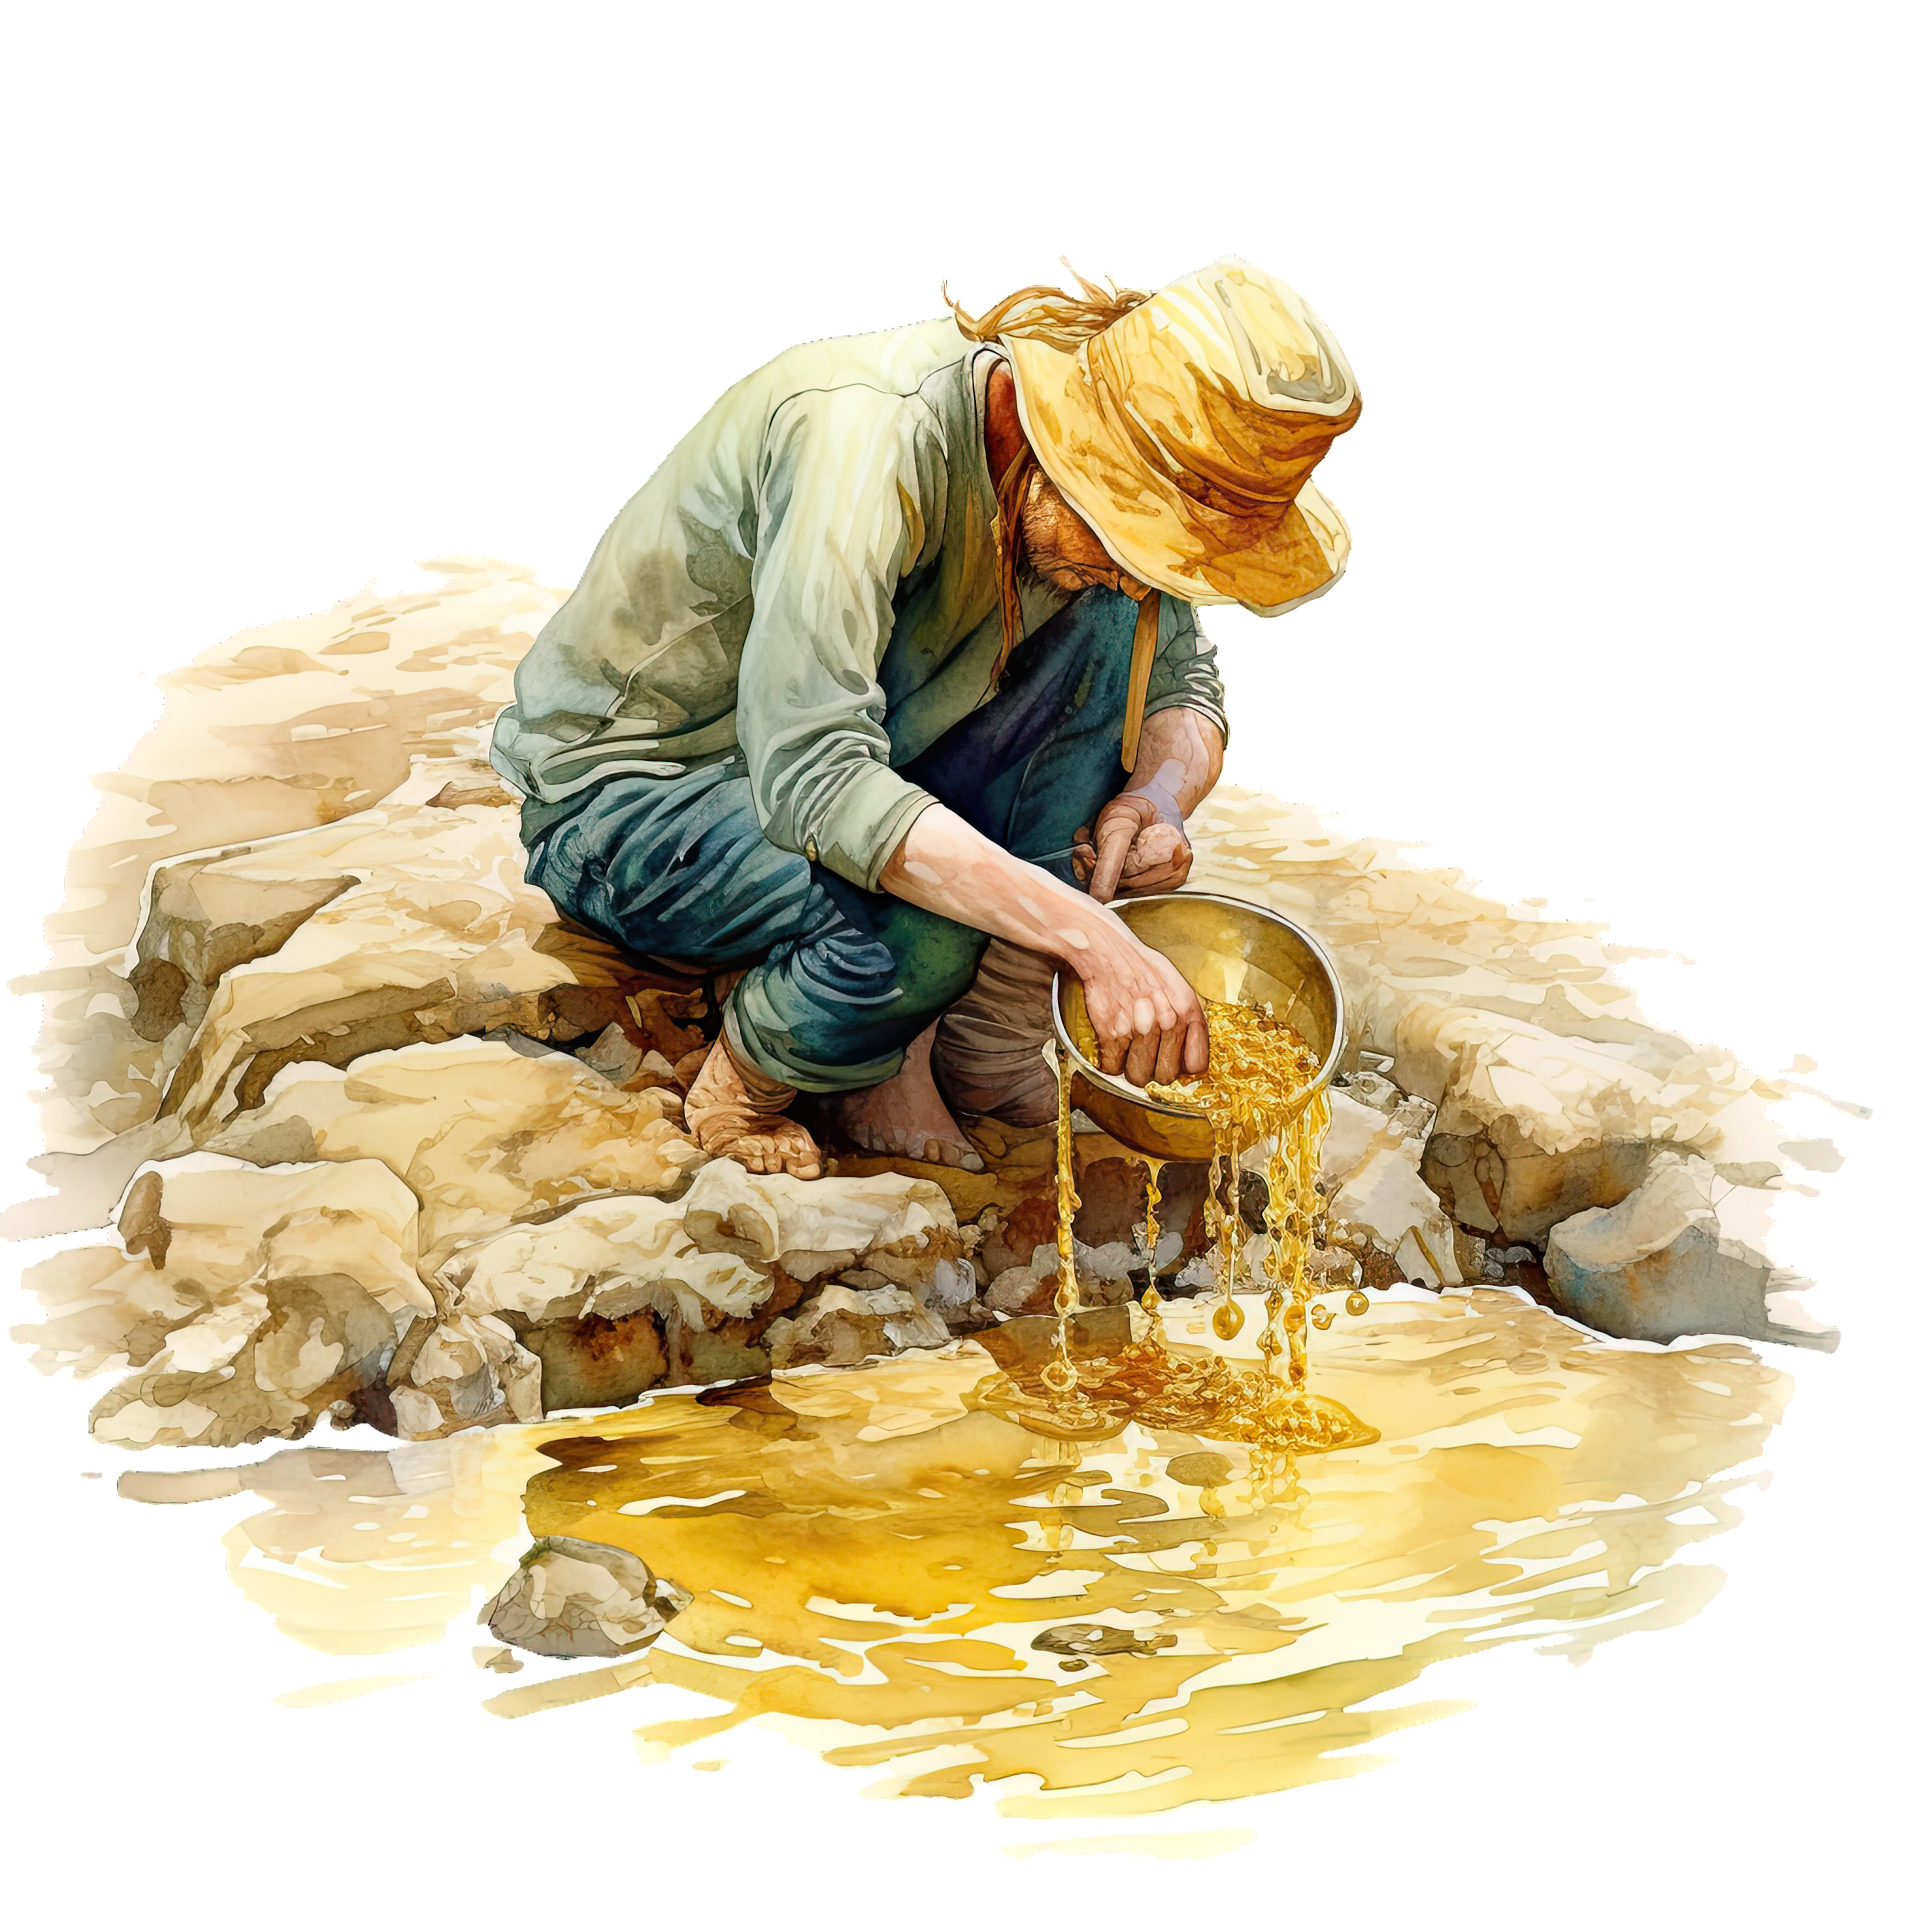 Panning For Gold.  - PanningInColorado.com is for sale.